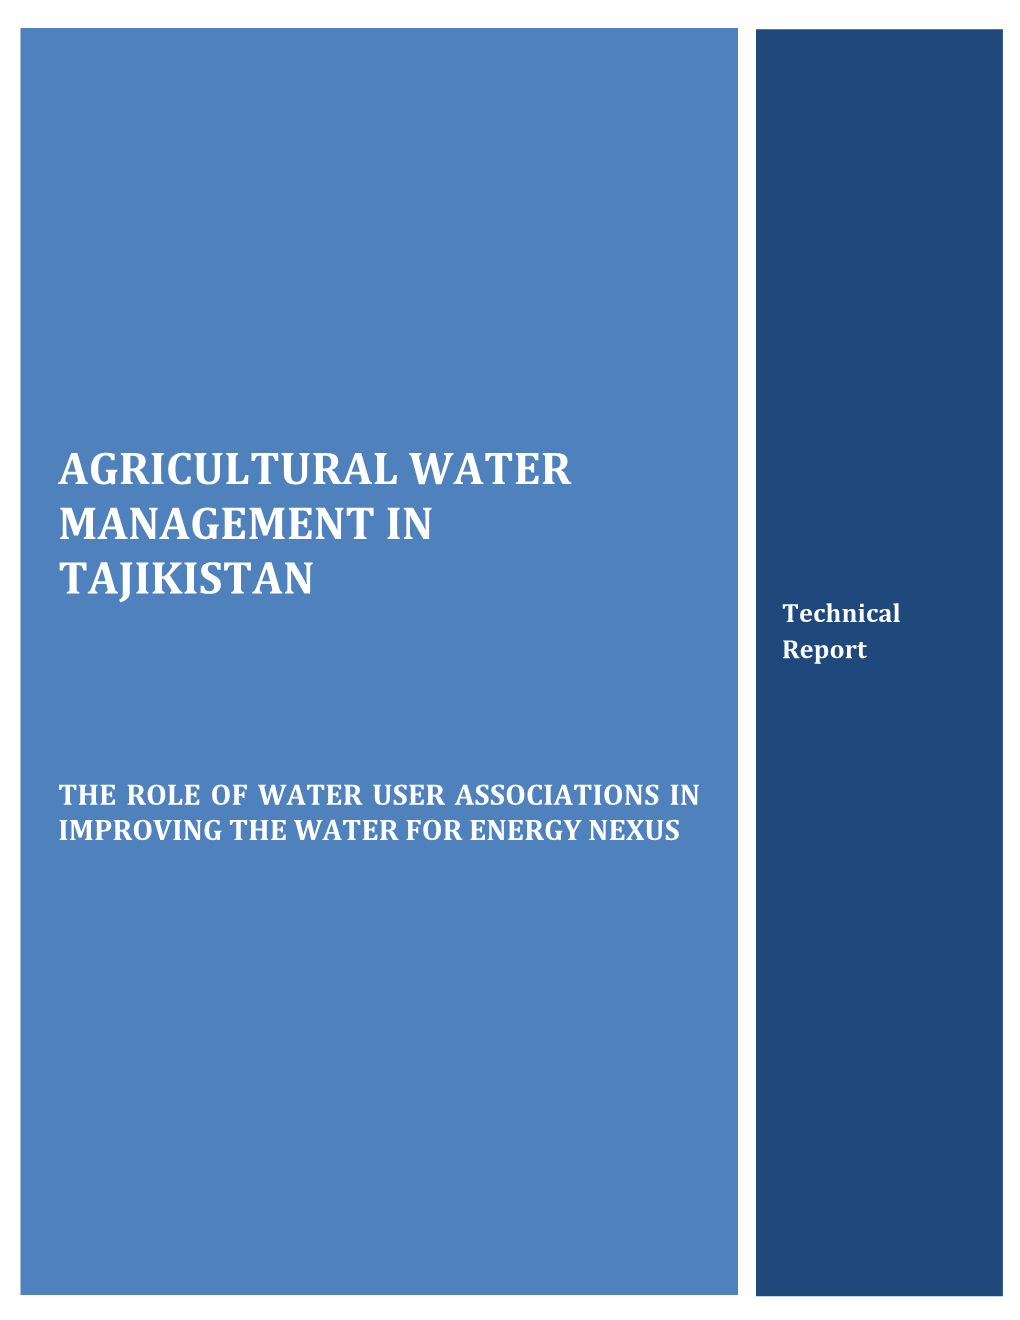 AGRICULTURAL WATER MANAGEMENT in TAJIKISTAN Technical Report